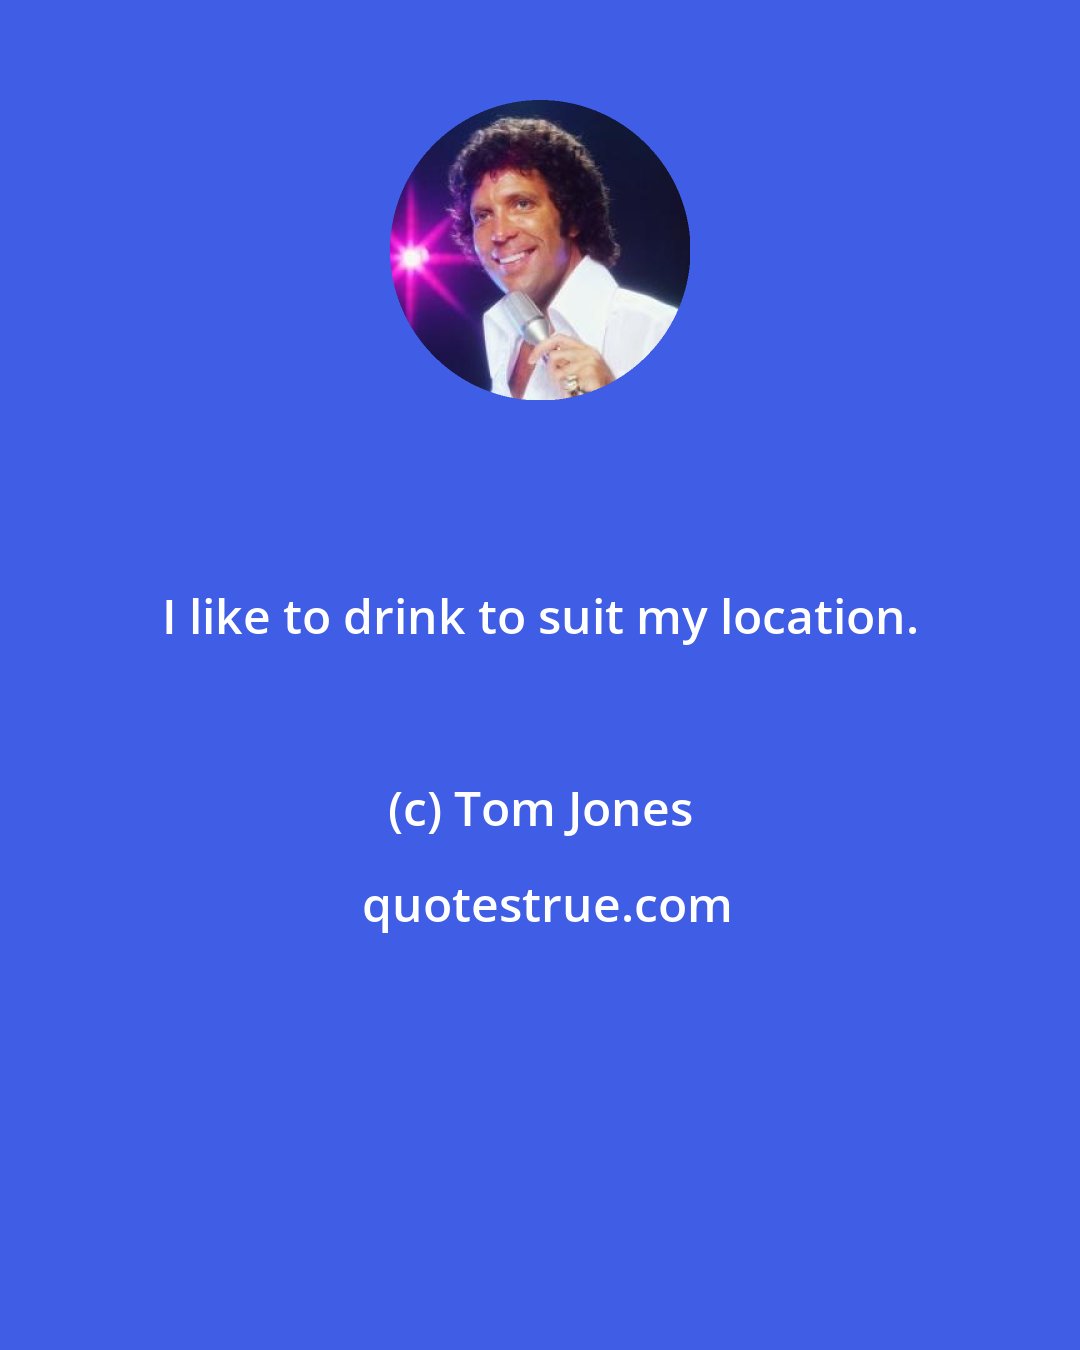 Tom Jones: I like to drink to suit my location.